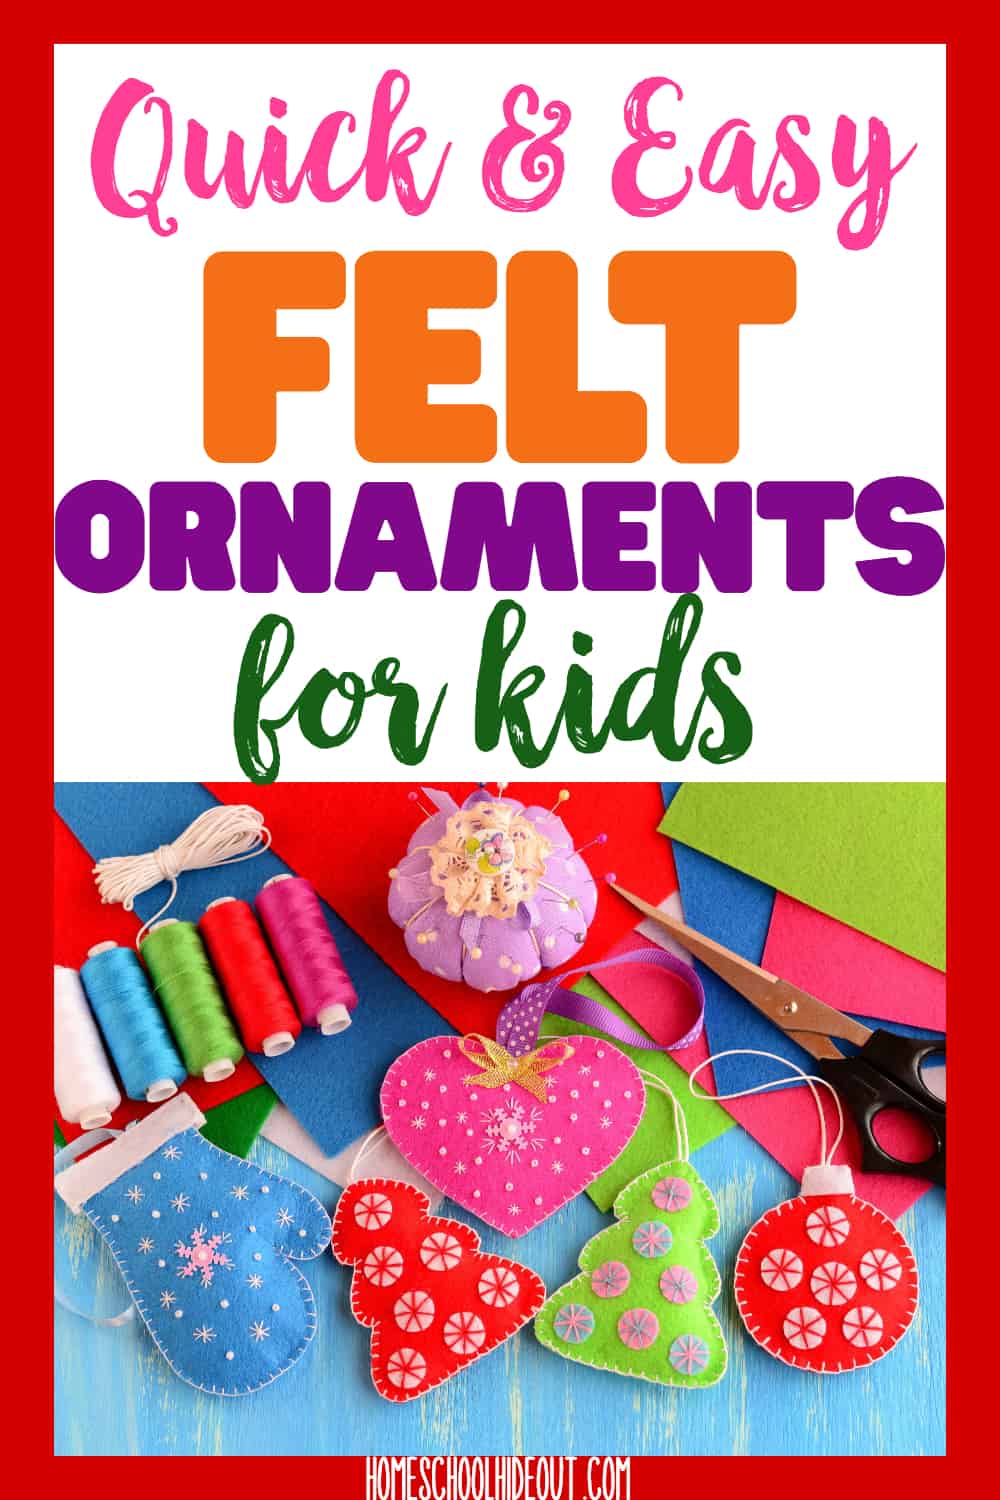 These easy felt ornaments for kids are perfect! Our tree looks gorgeous and we made so many memories! #handmadechristmas #handmade #christmas #tree #ornaments